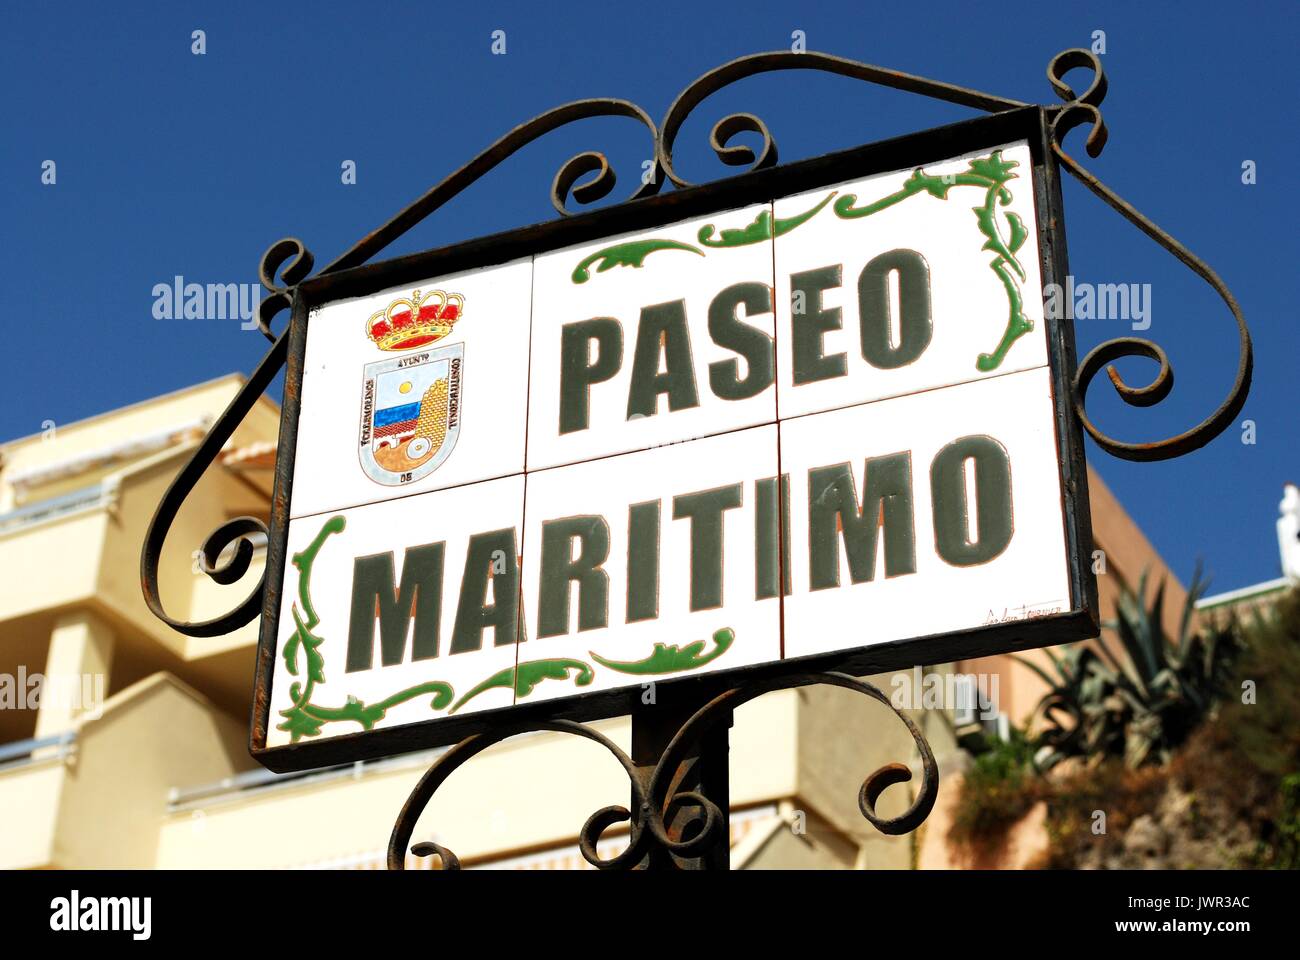 Ceramic Paseo Maritimo street sign in a wrought iron frame, Torremolinos, Malaga Province, Andalusia, Spain, Western Europe. Stock Photo